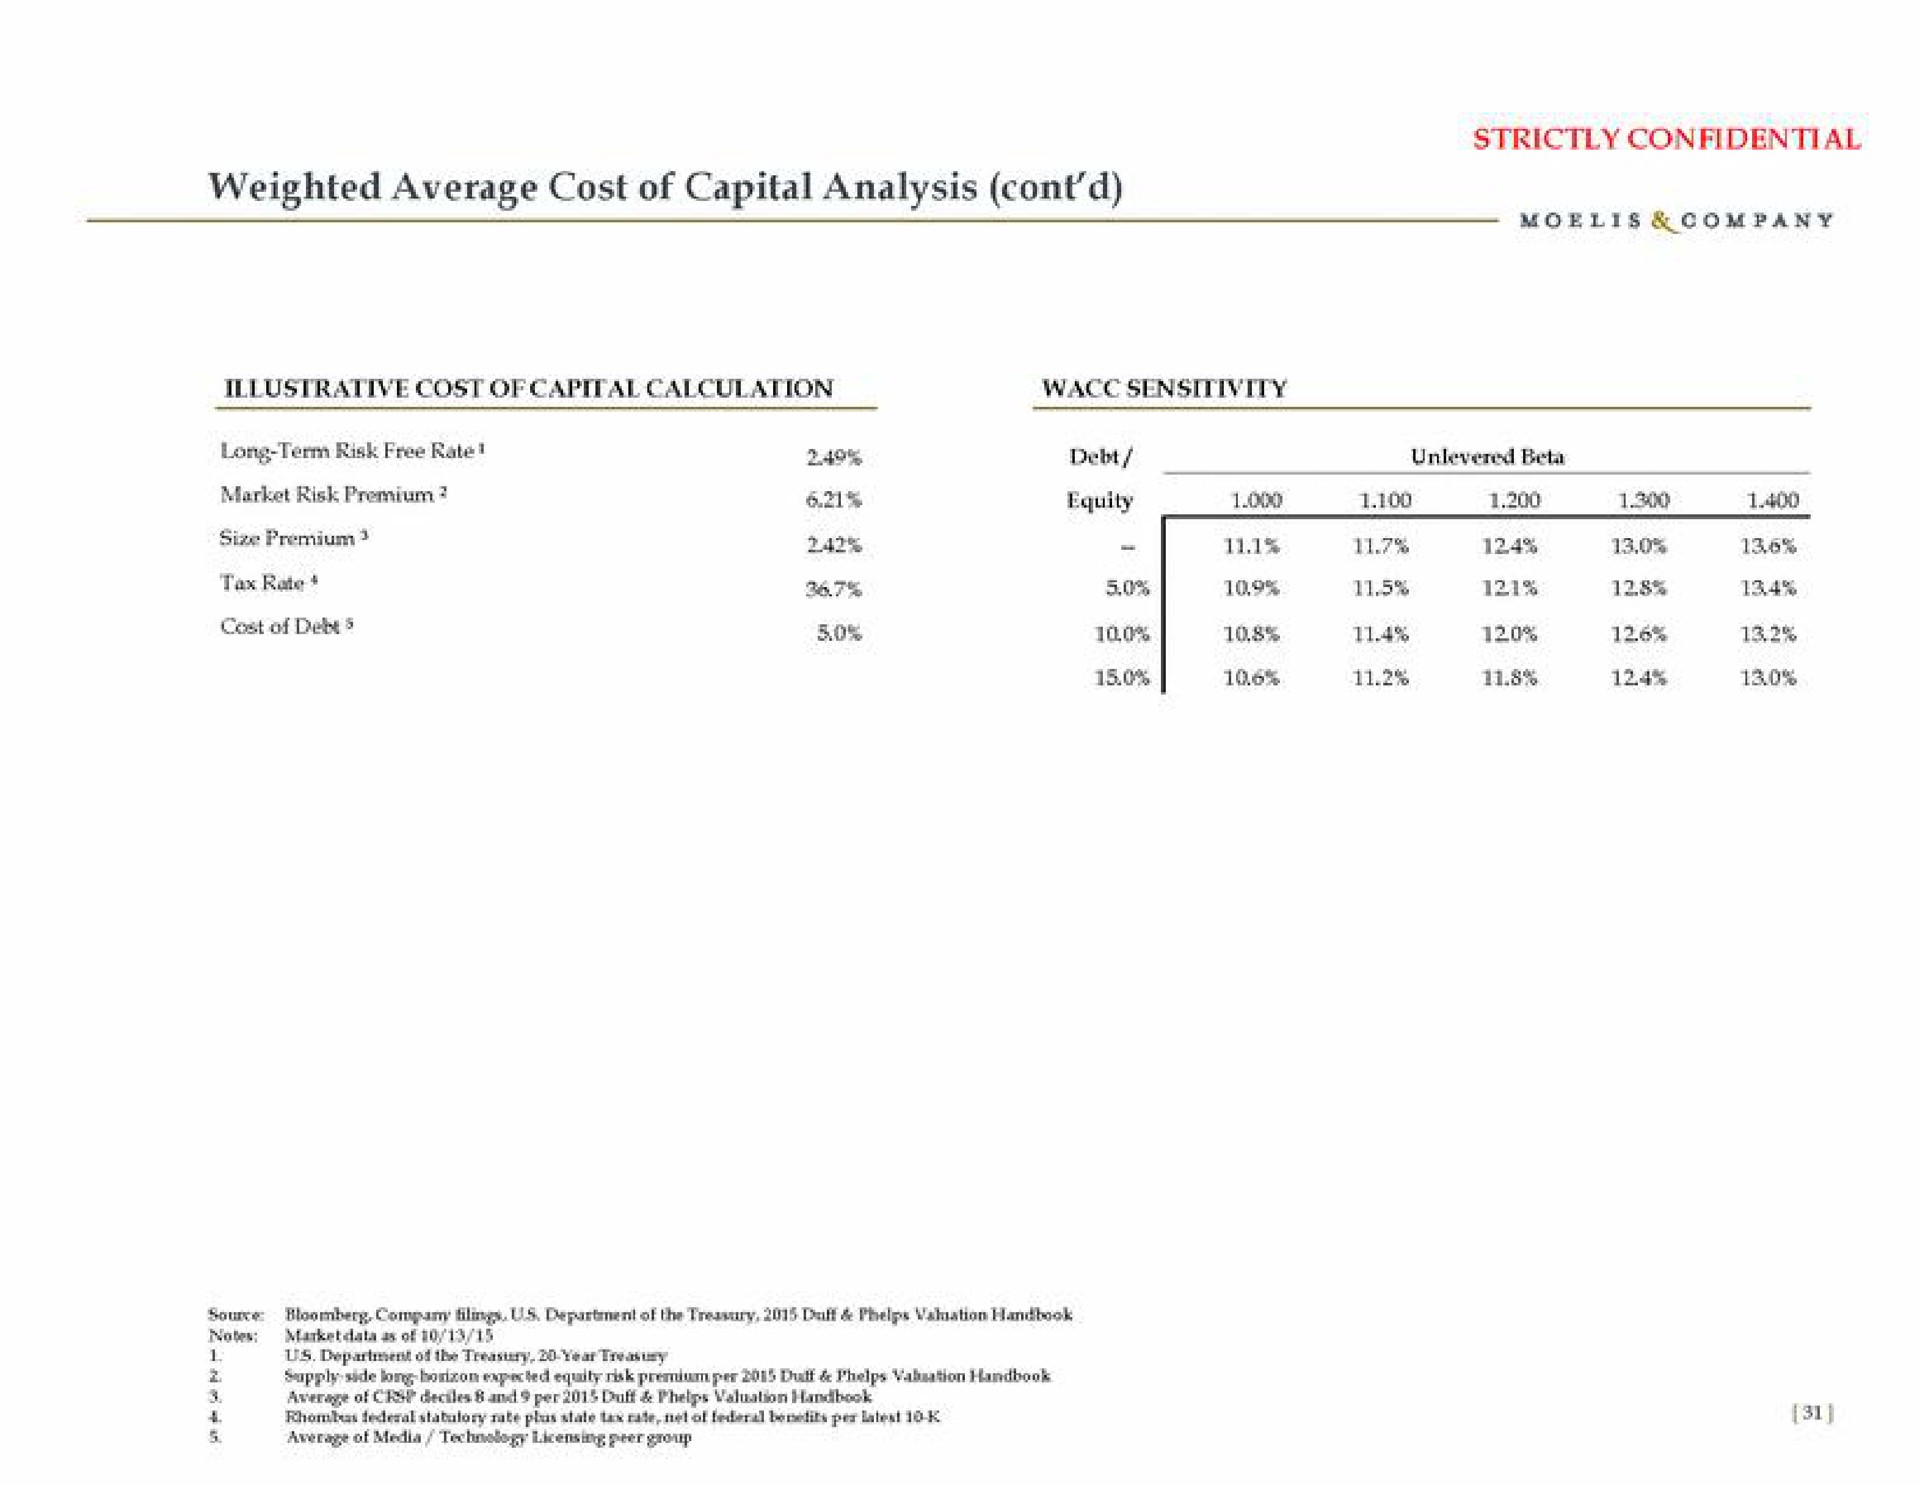 weighted average cost of capital analysis | Moelis & Company